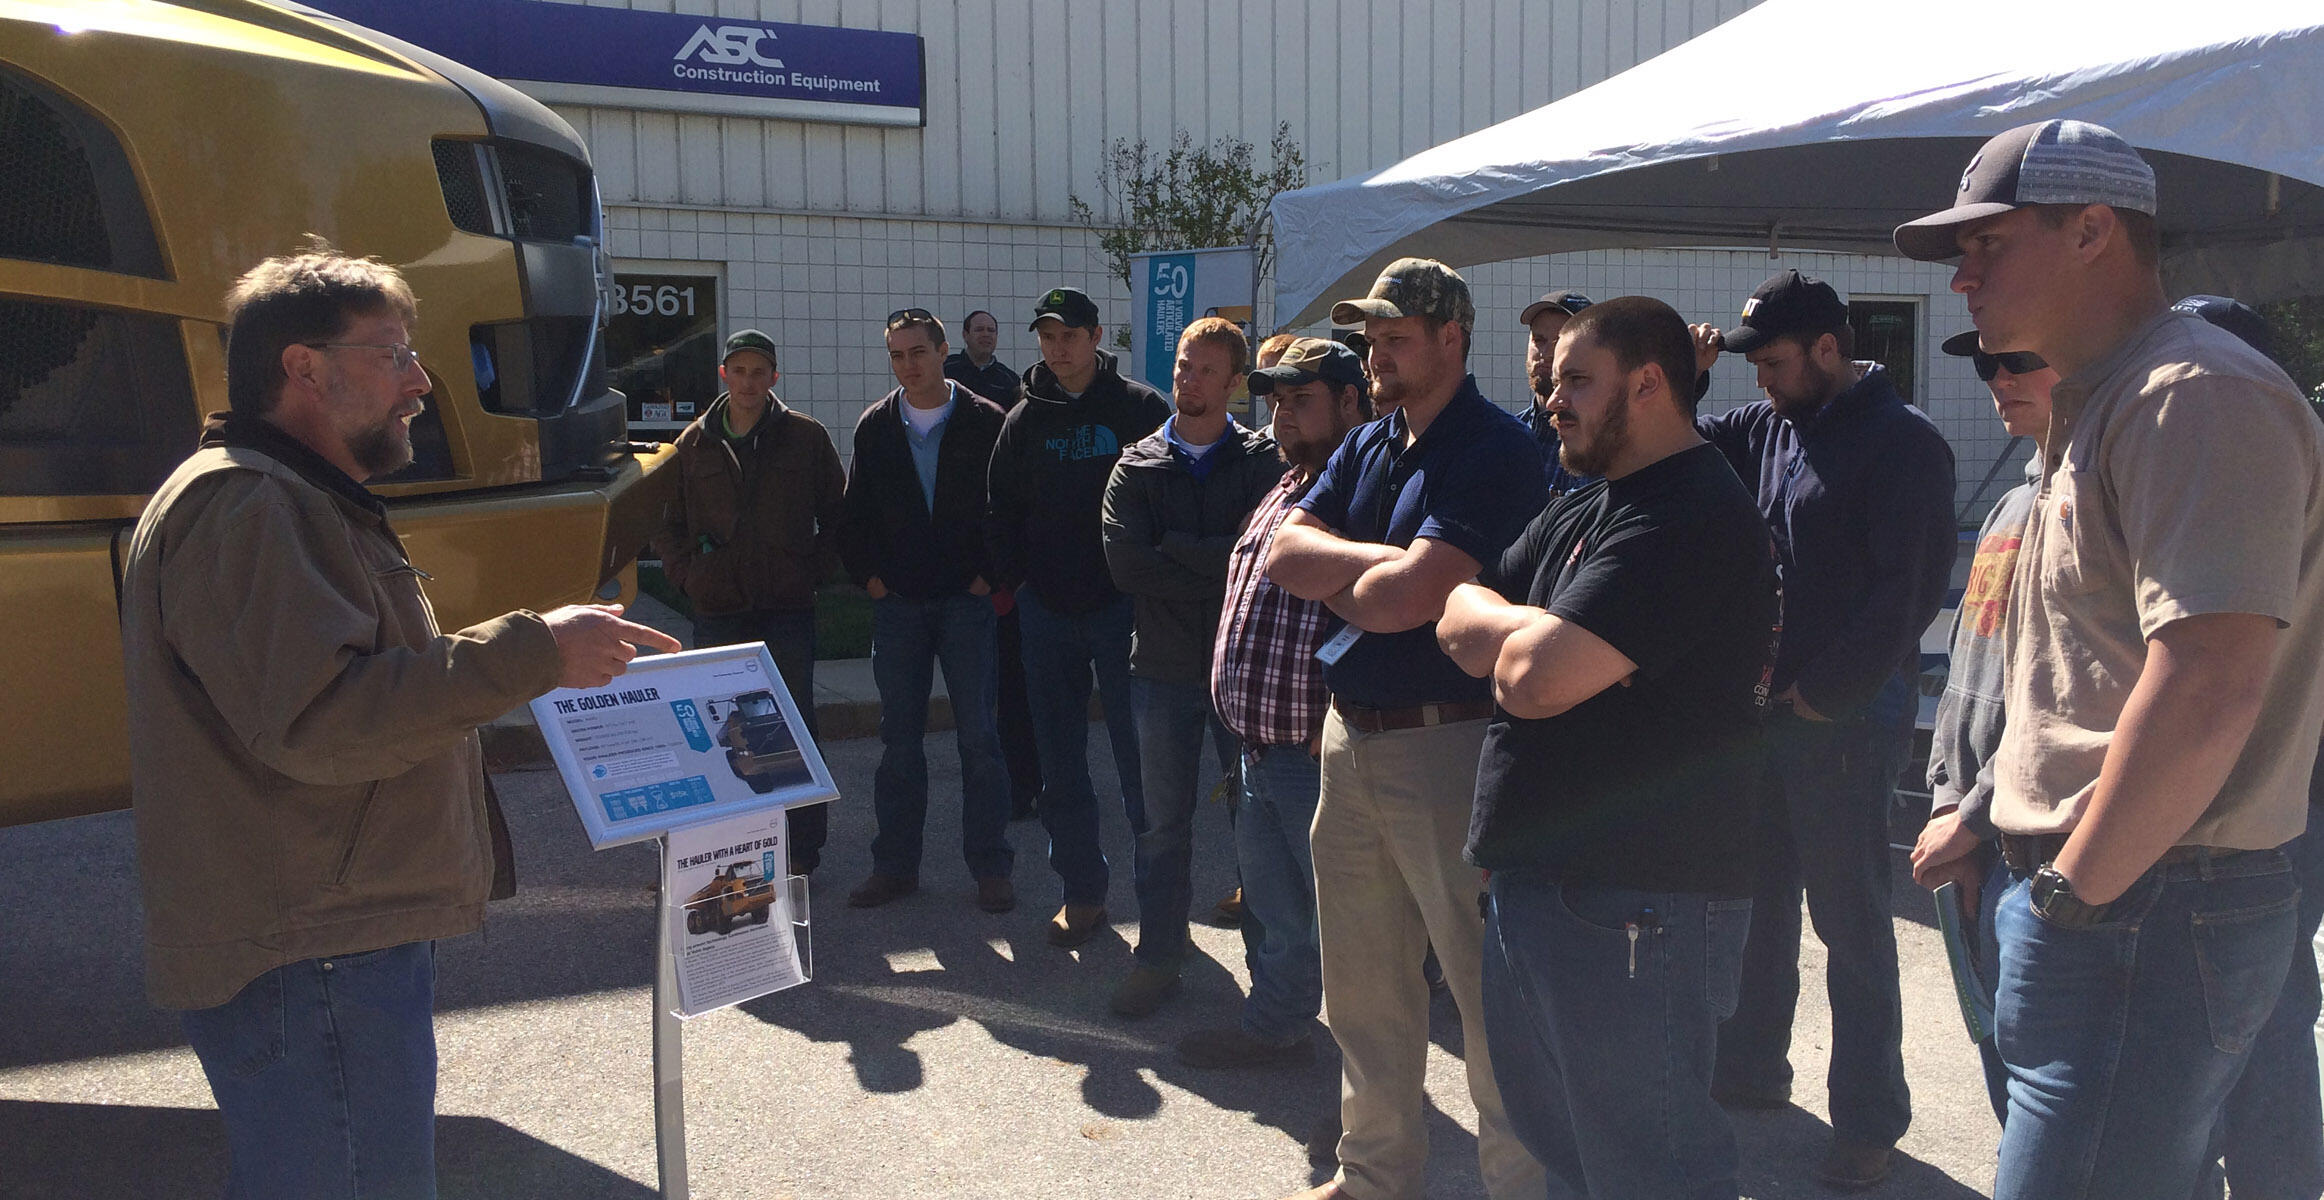 Students visit Volvo's dealer ASC, to learn more about hi-tech construction equipment 